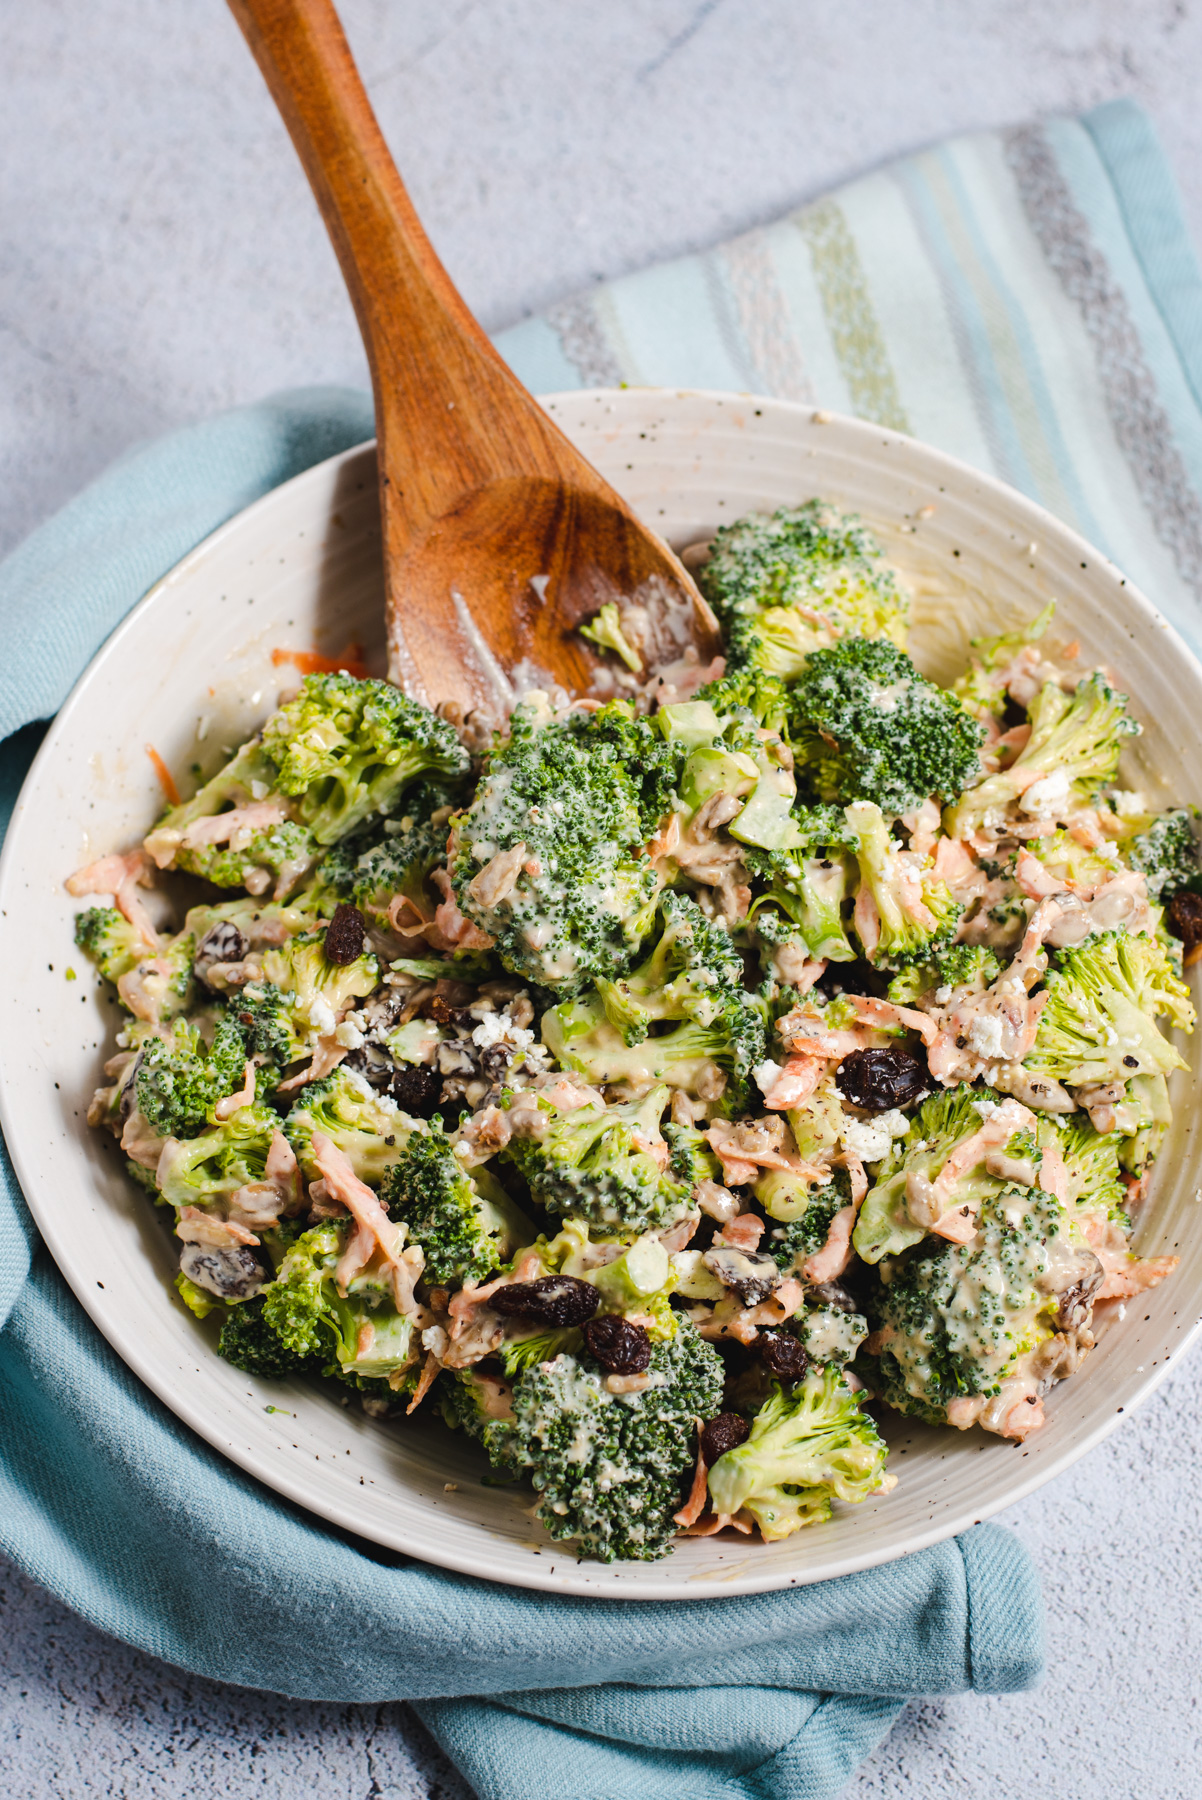 Broccoli salad in a white bowl with a wooden serving spoon.